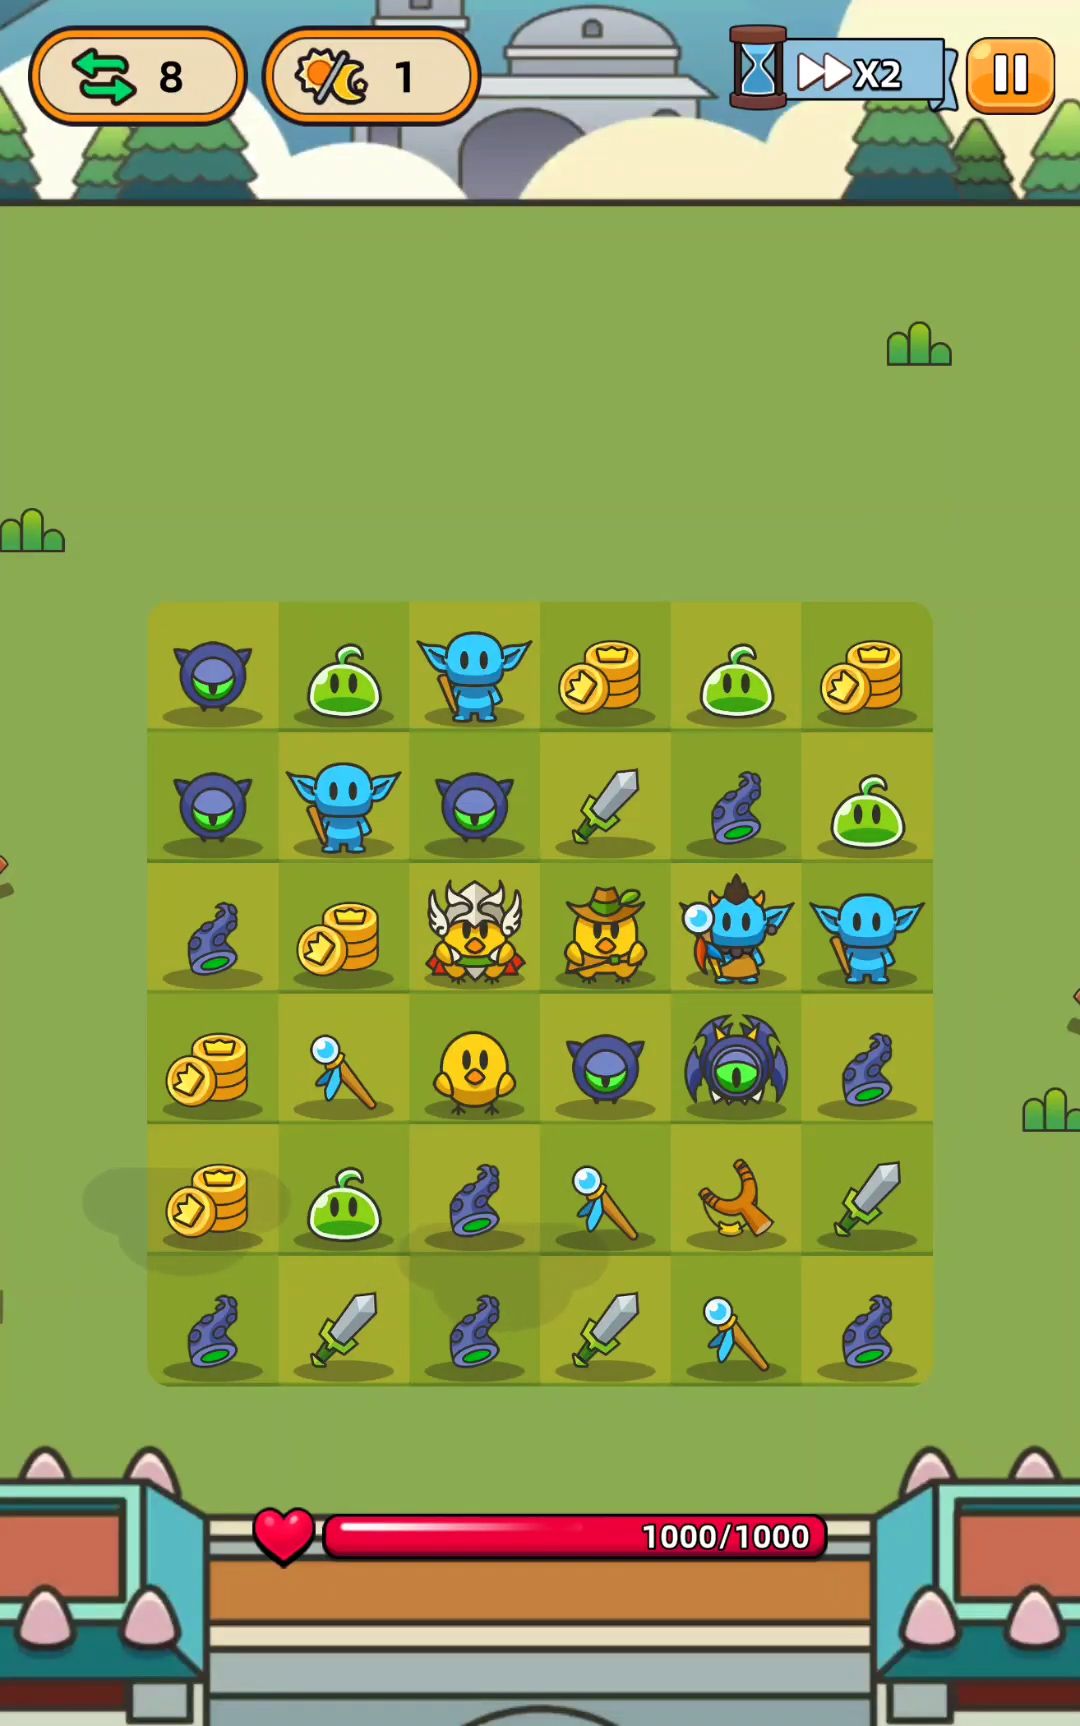 Slime Legion - Android game screenshots.